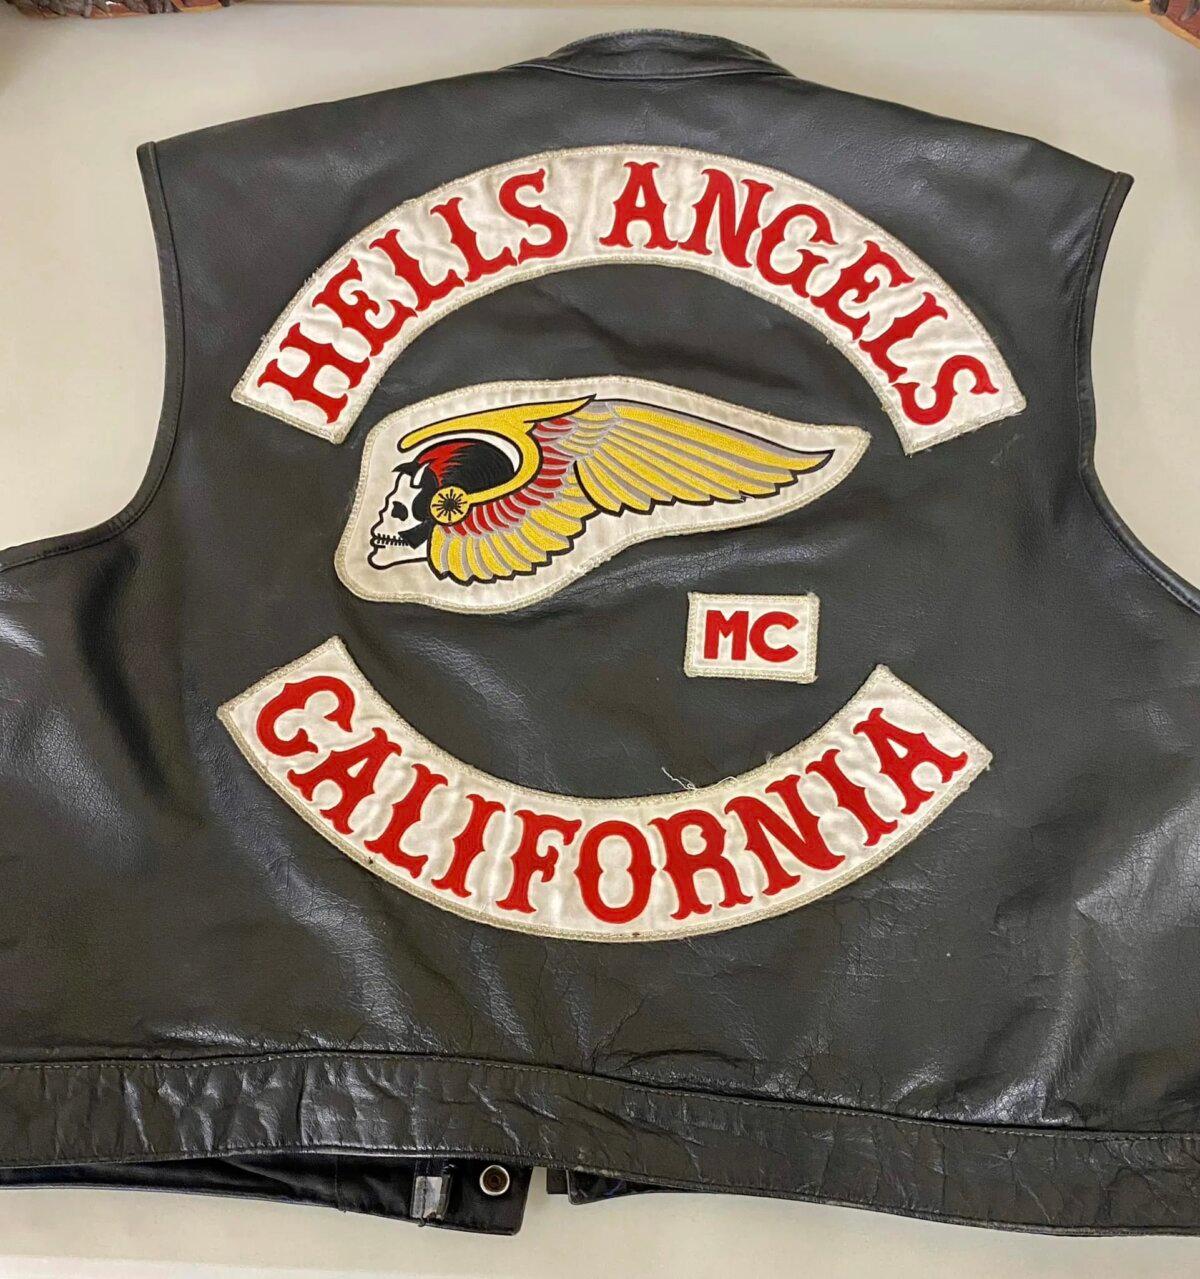 A Hells Angels member vest seized by Kern County Sheriff’s personnel during raids in Bakersfield, Calif., on June 25, 2024. (Courtesy of Kern County Sheriff’s Office)